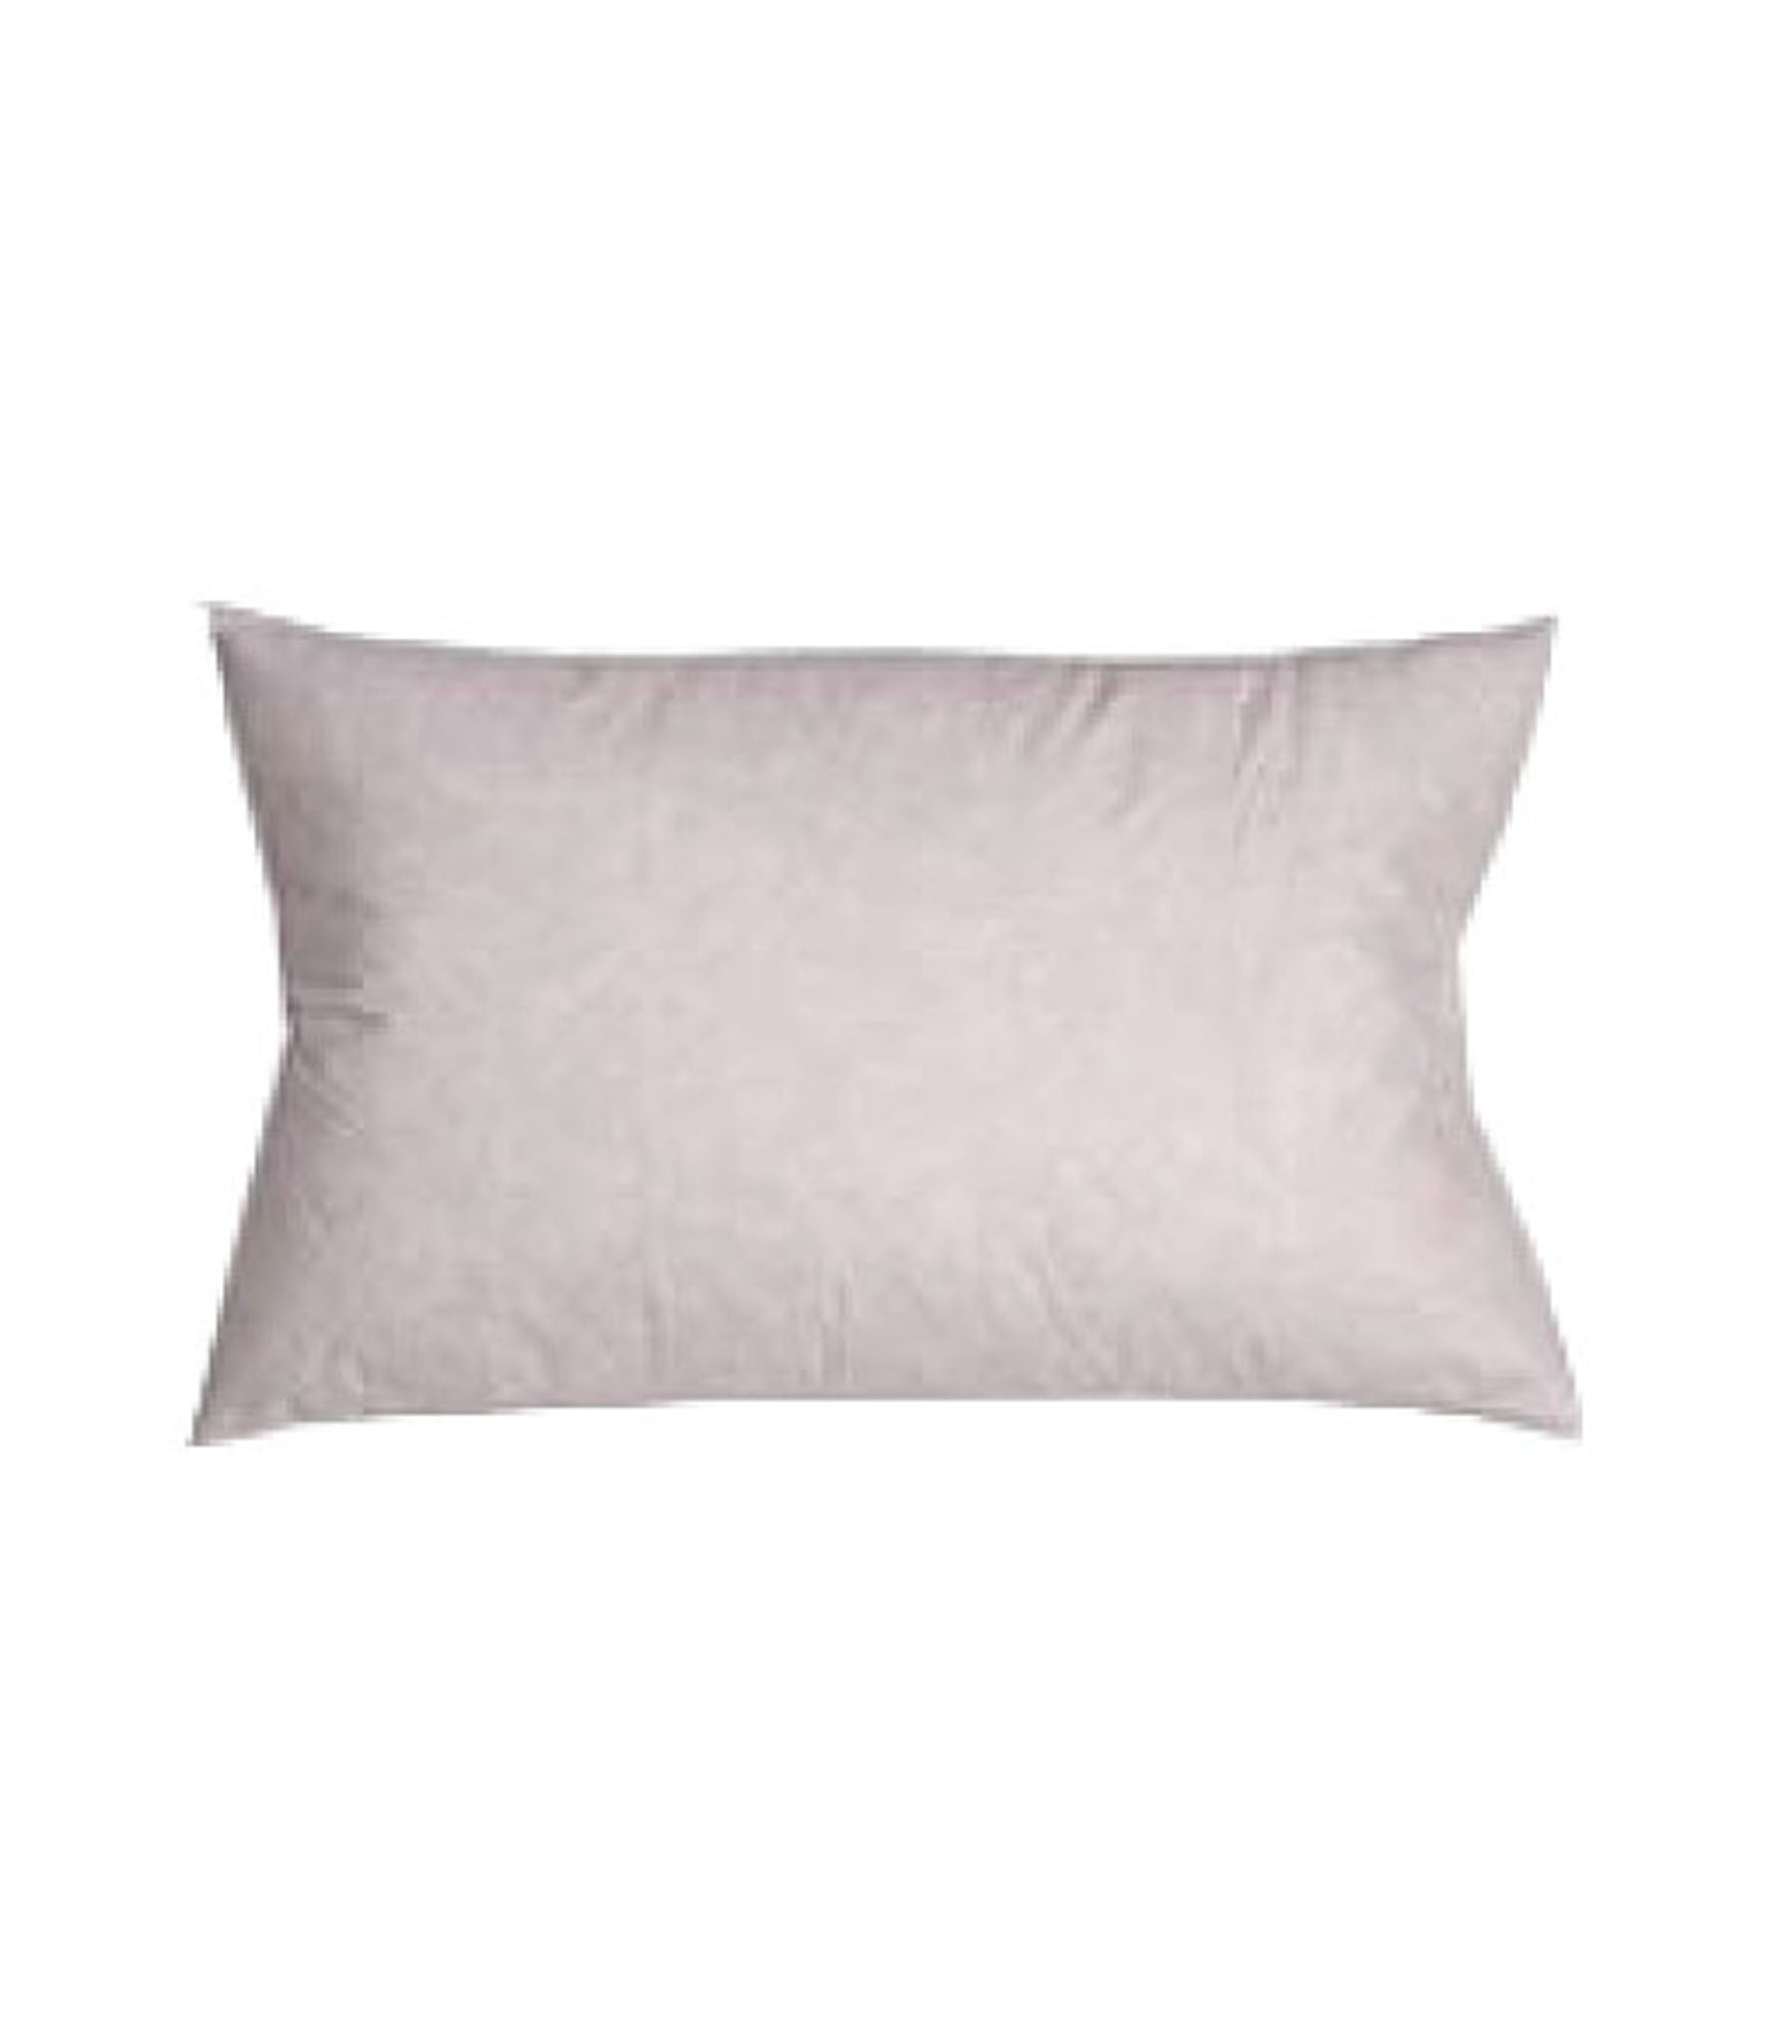 Set of 2 Down and Feather Pillow Insert The Fabric is Cotton 18x18 Inch 